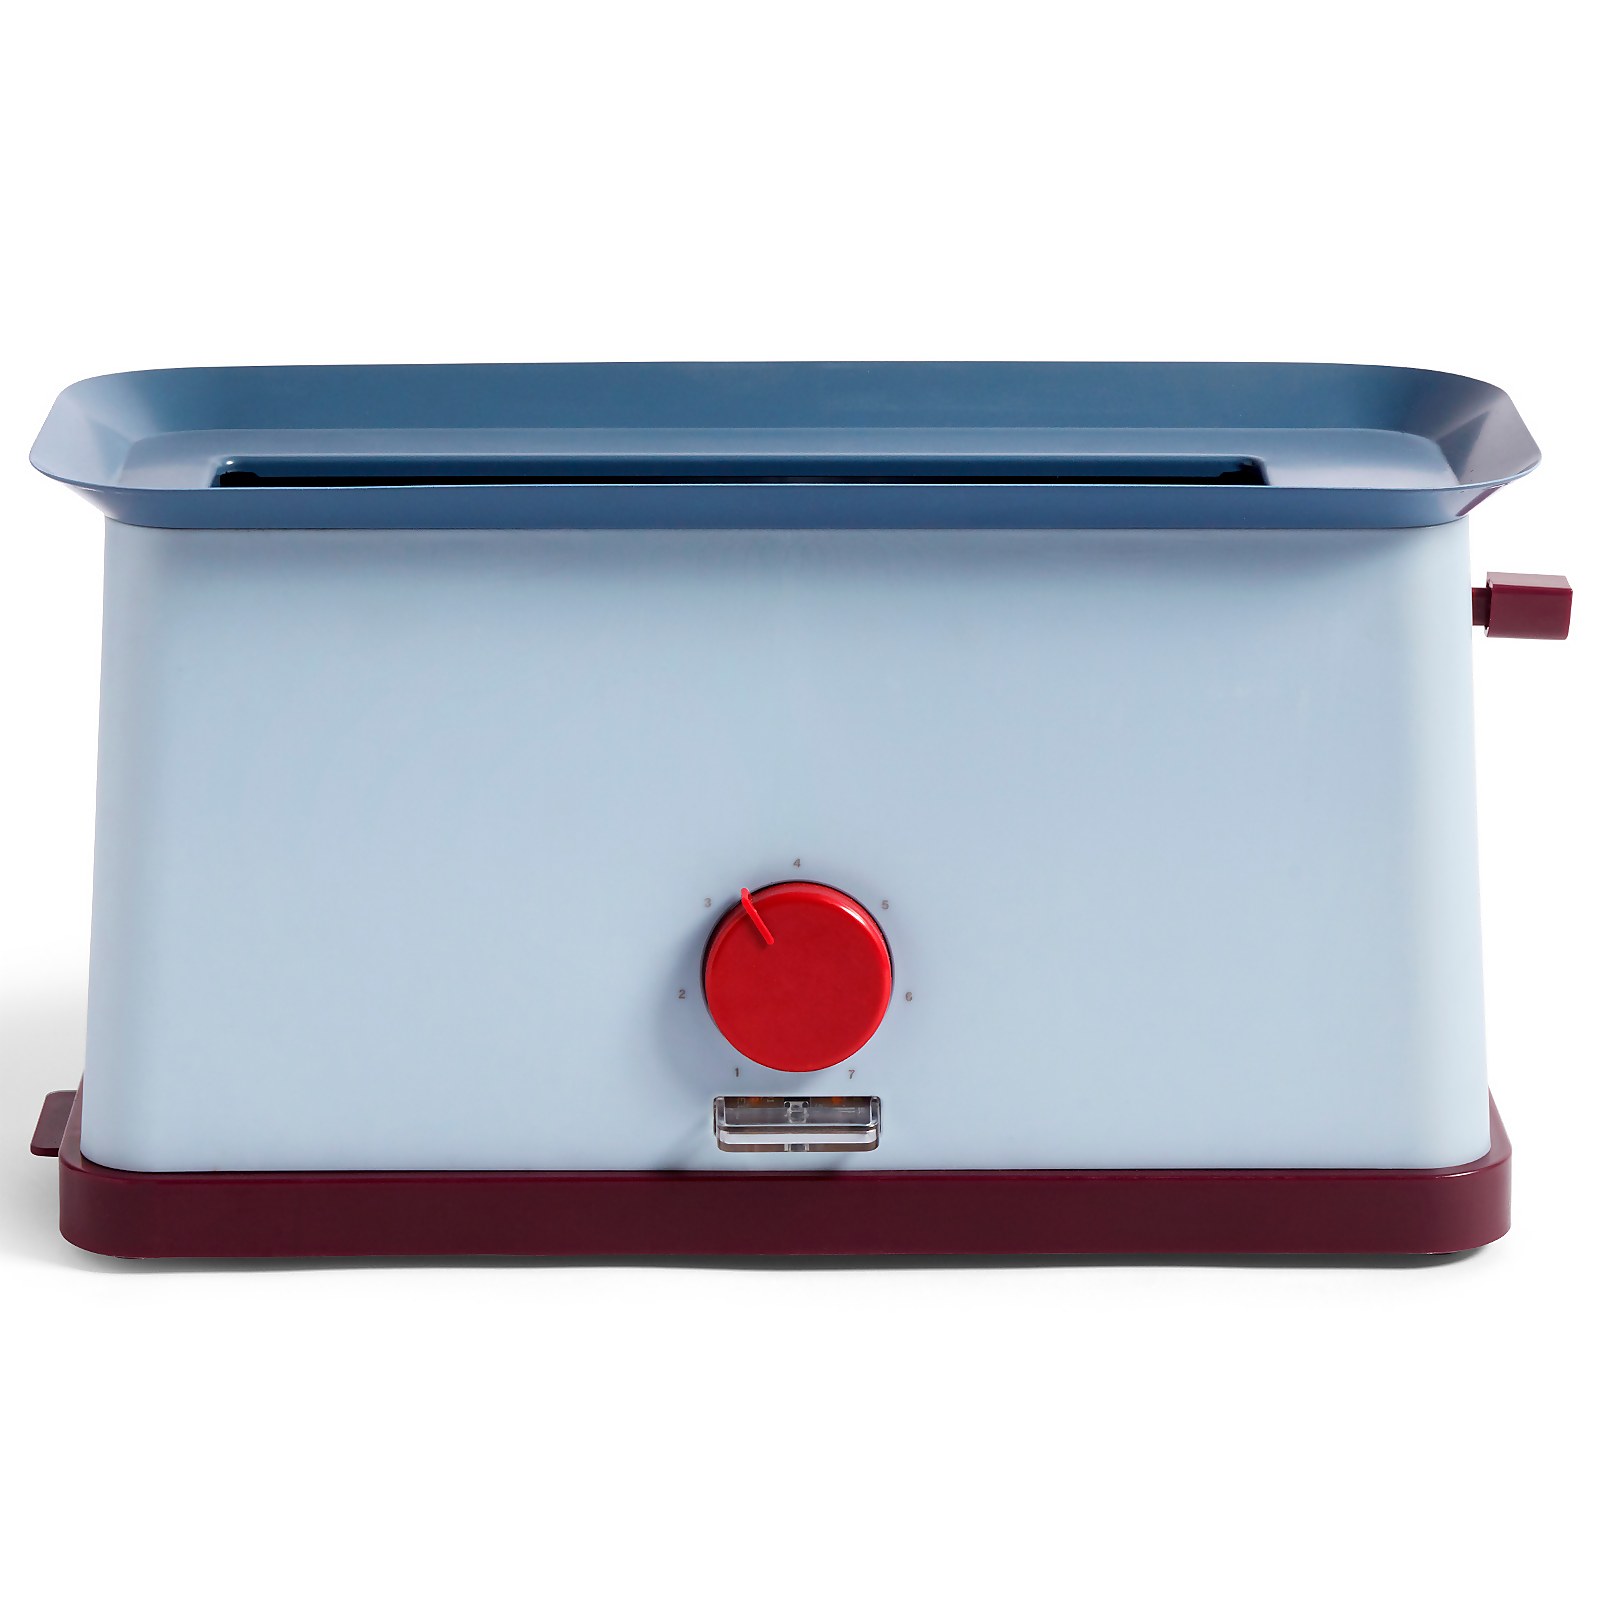 HAY - Sowden Toaster - Blue